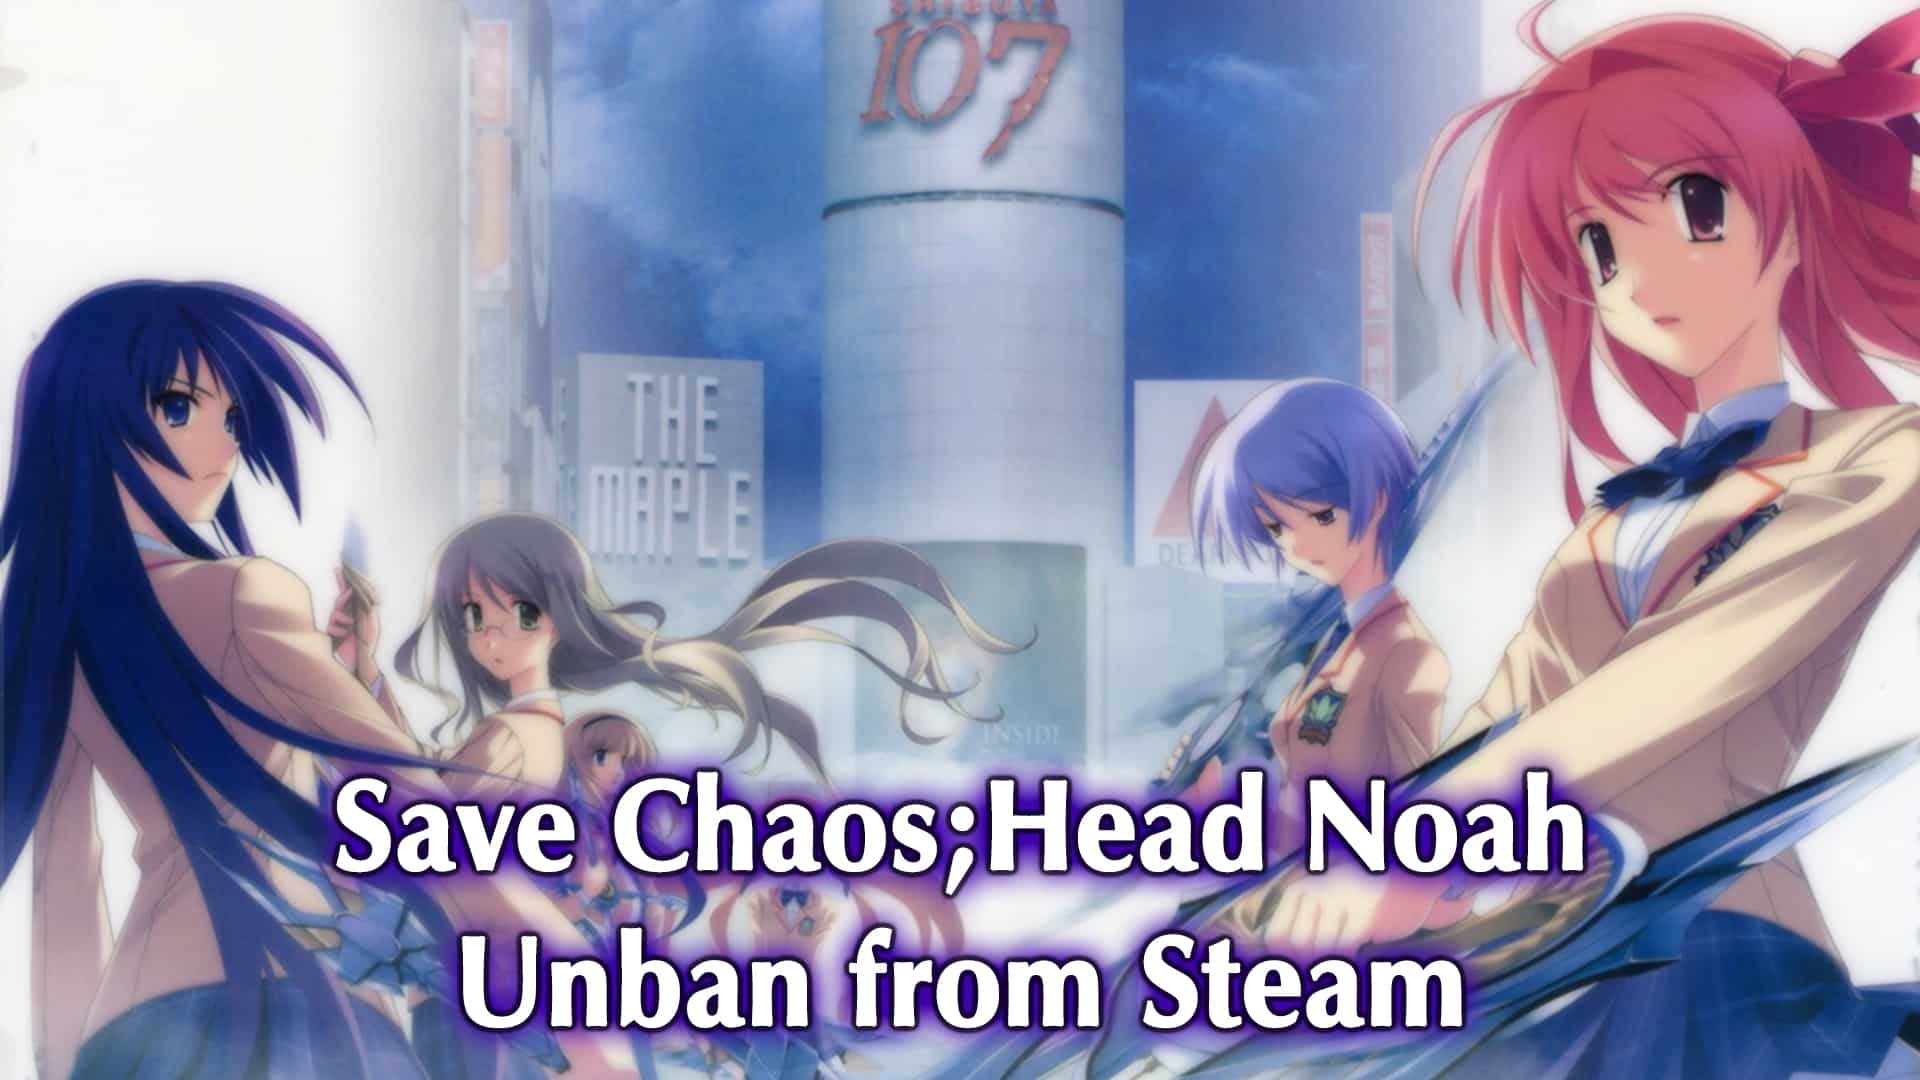 [UPDATE] Science Adventure Fans Unite to Save Chaos;Head Noah From Unjustifiable Steam Ban